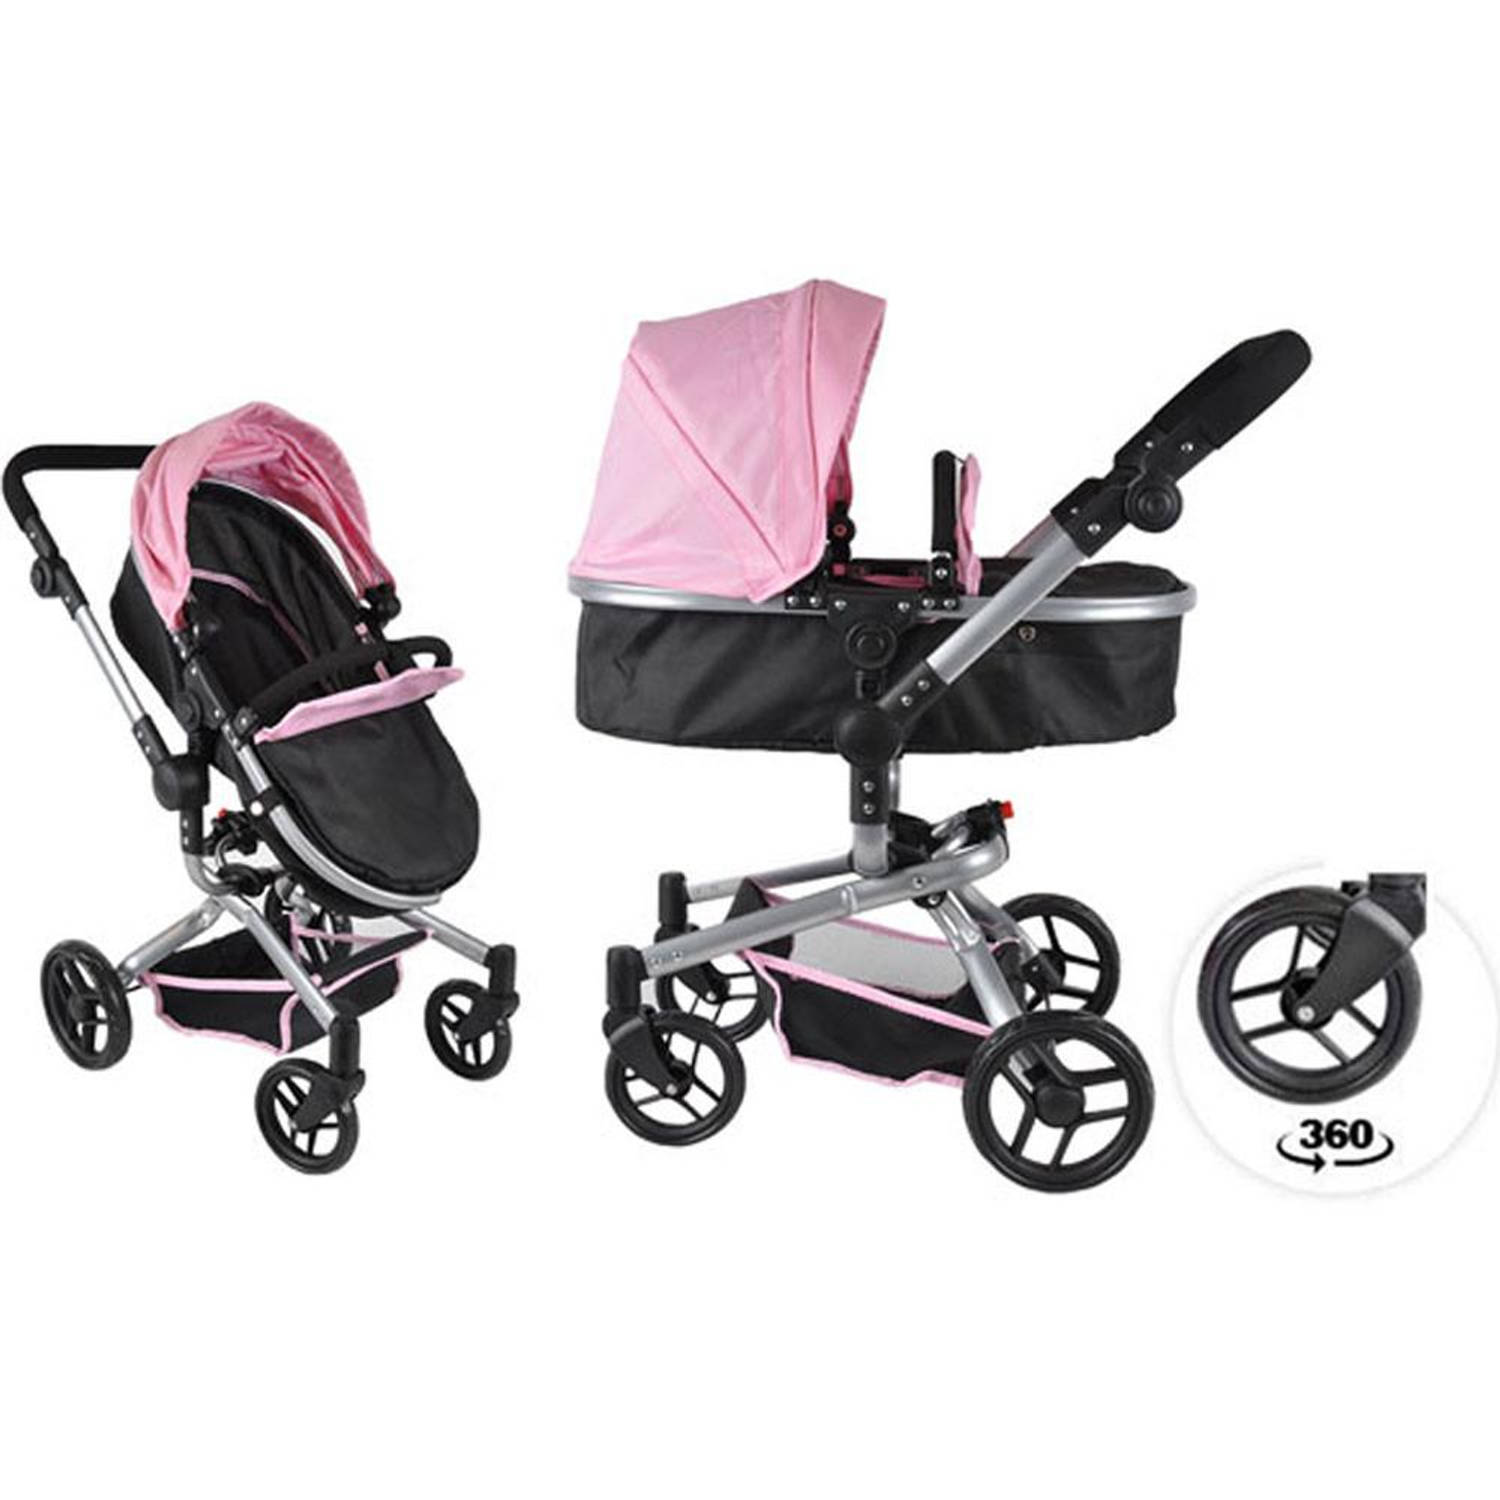 Bandits and Angels Poppenwagen Black Angel 2in1 softpink